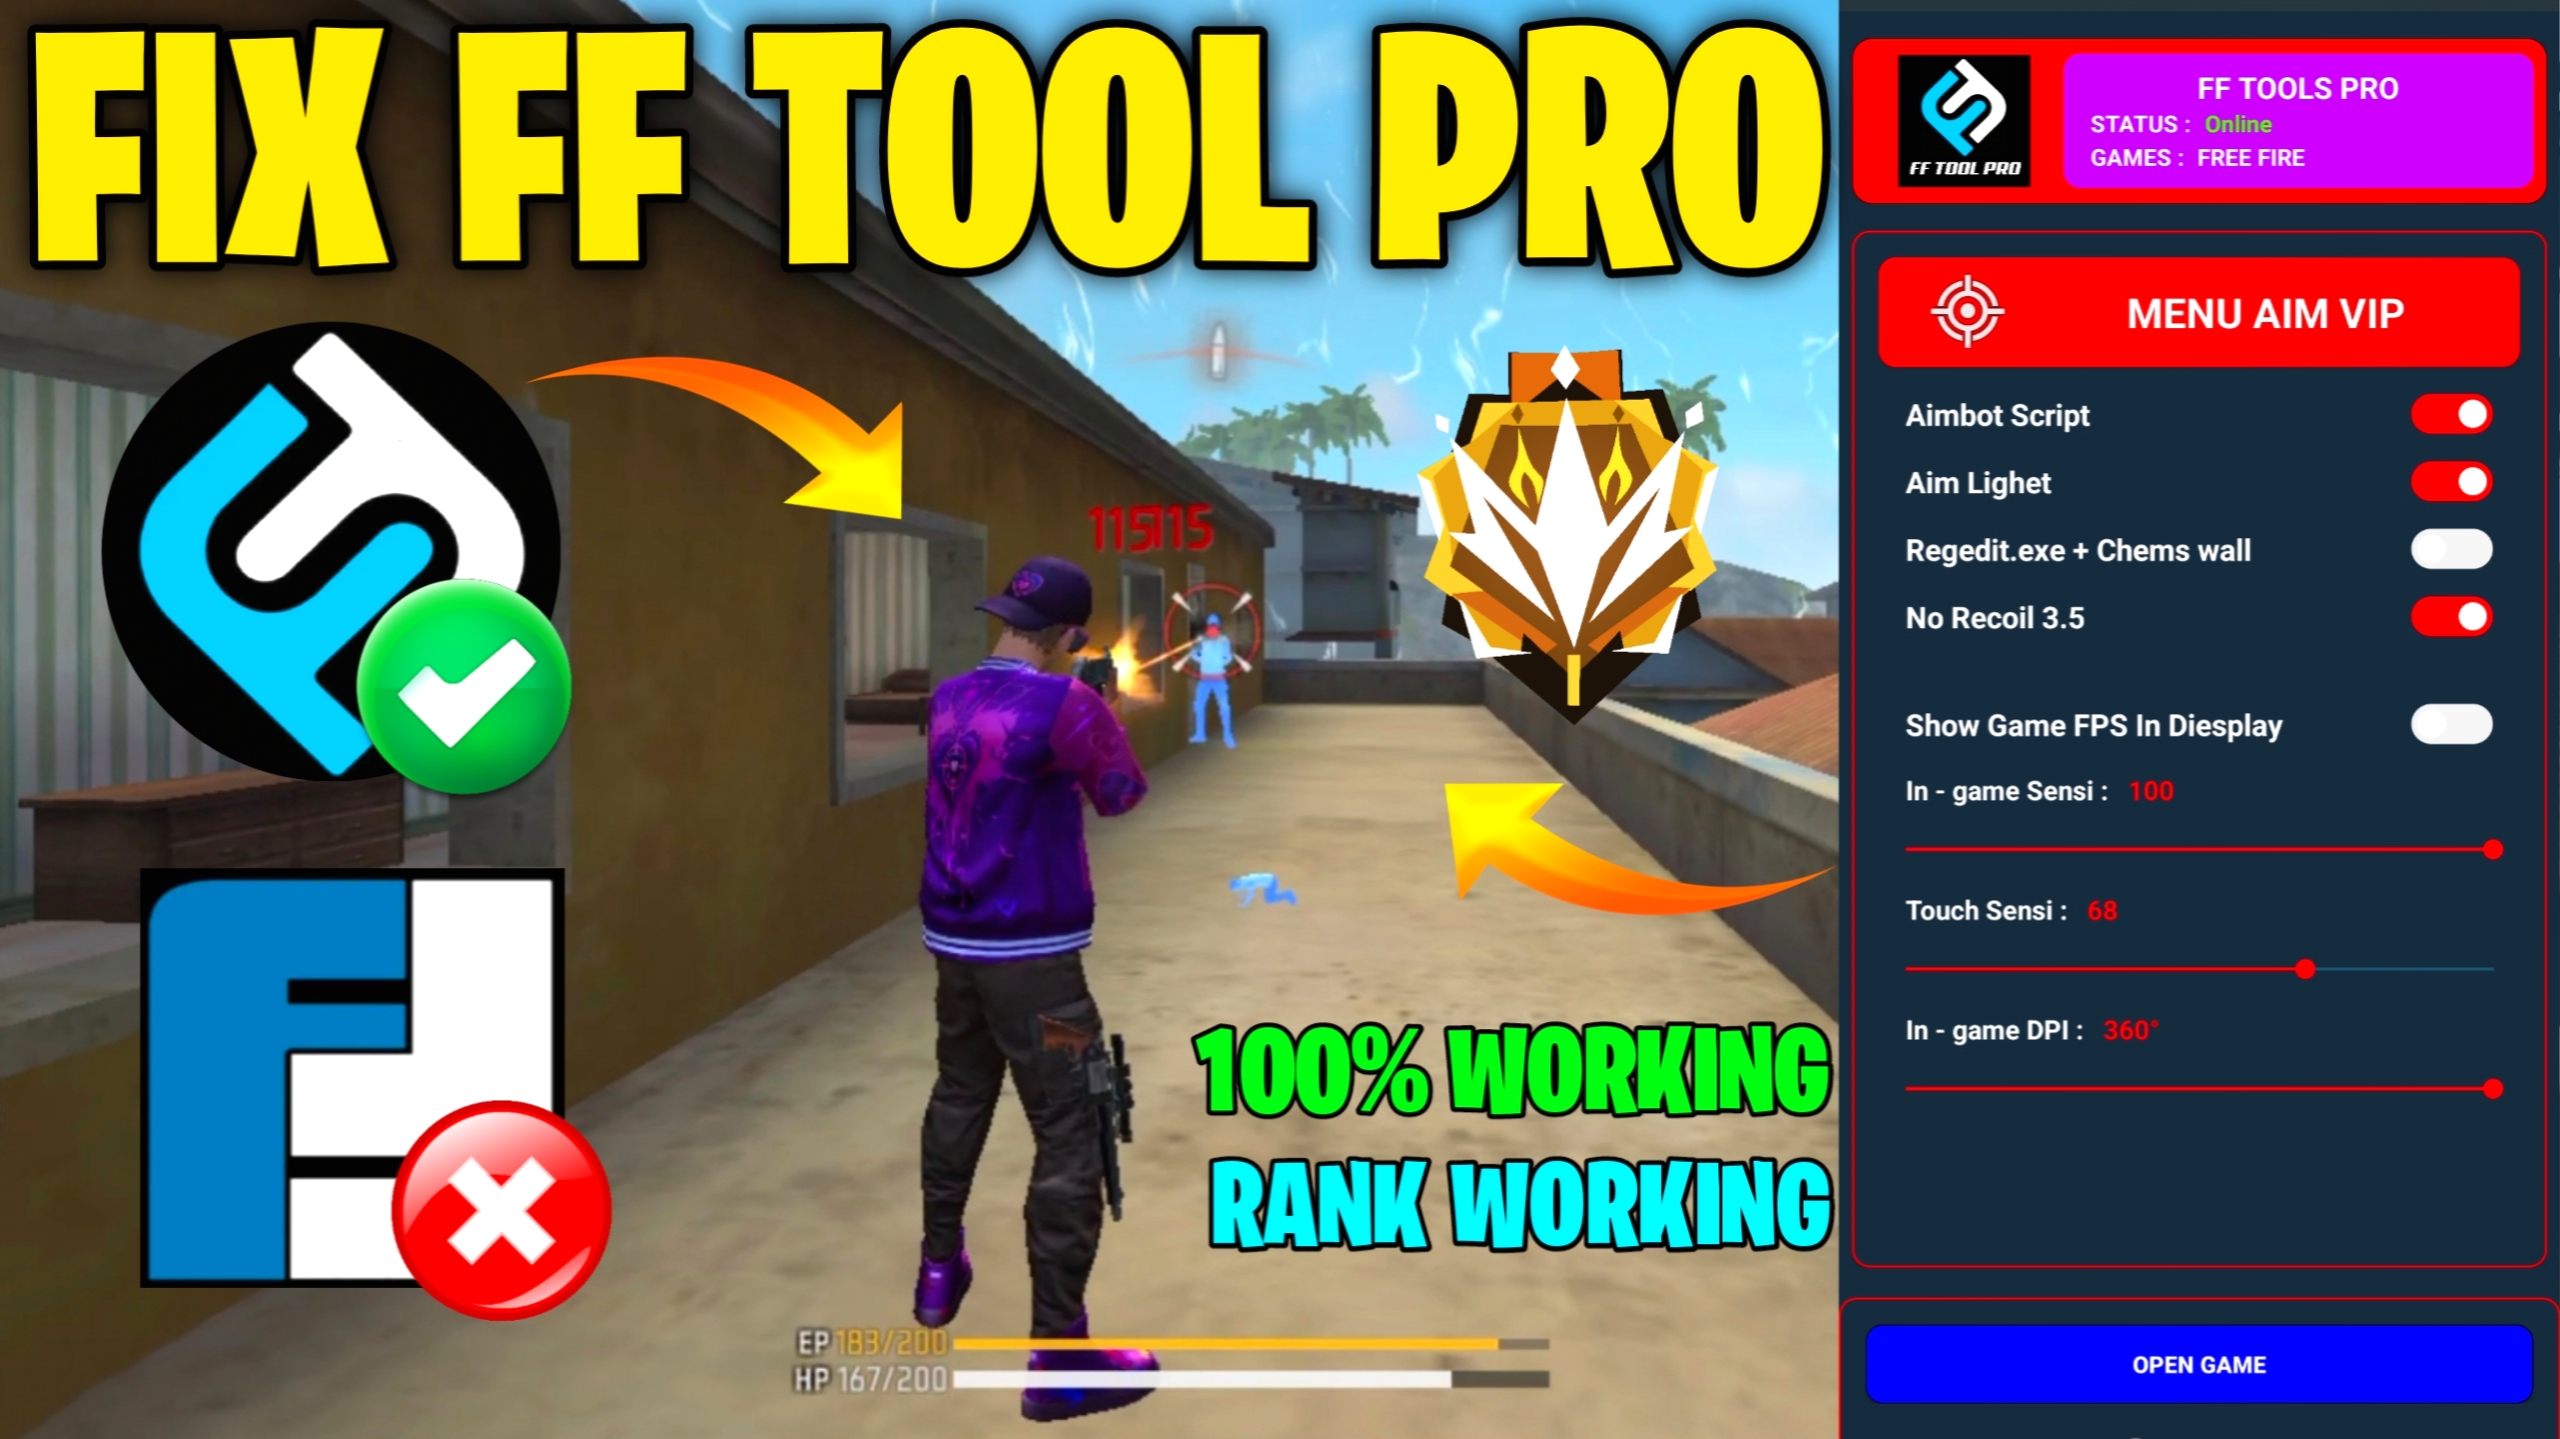 Download FF Tools Pro APK Latest Version 2.6 for Android